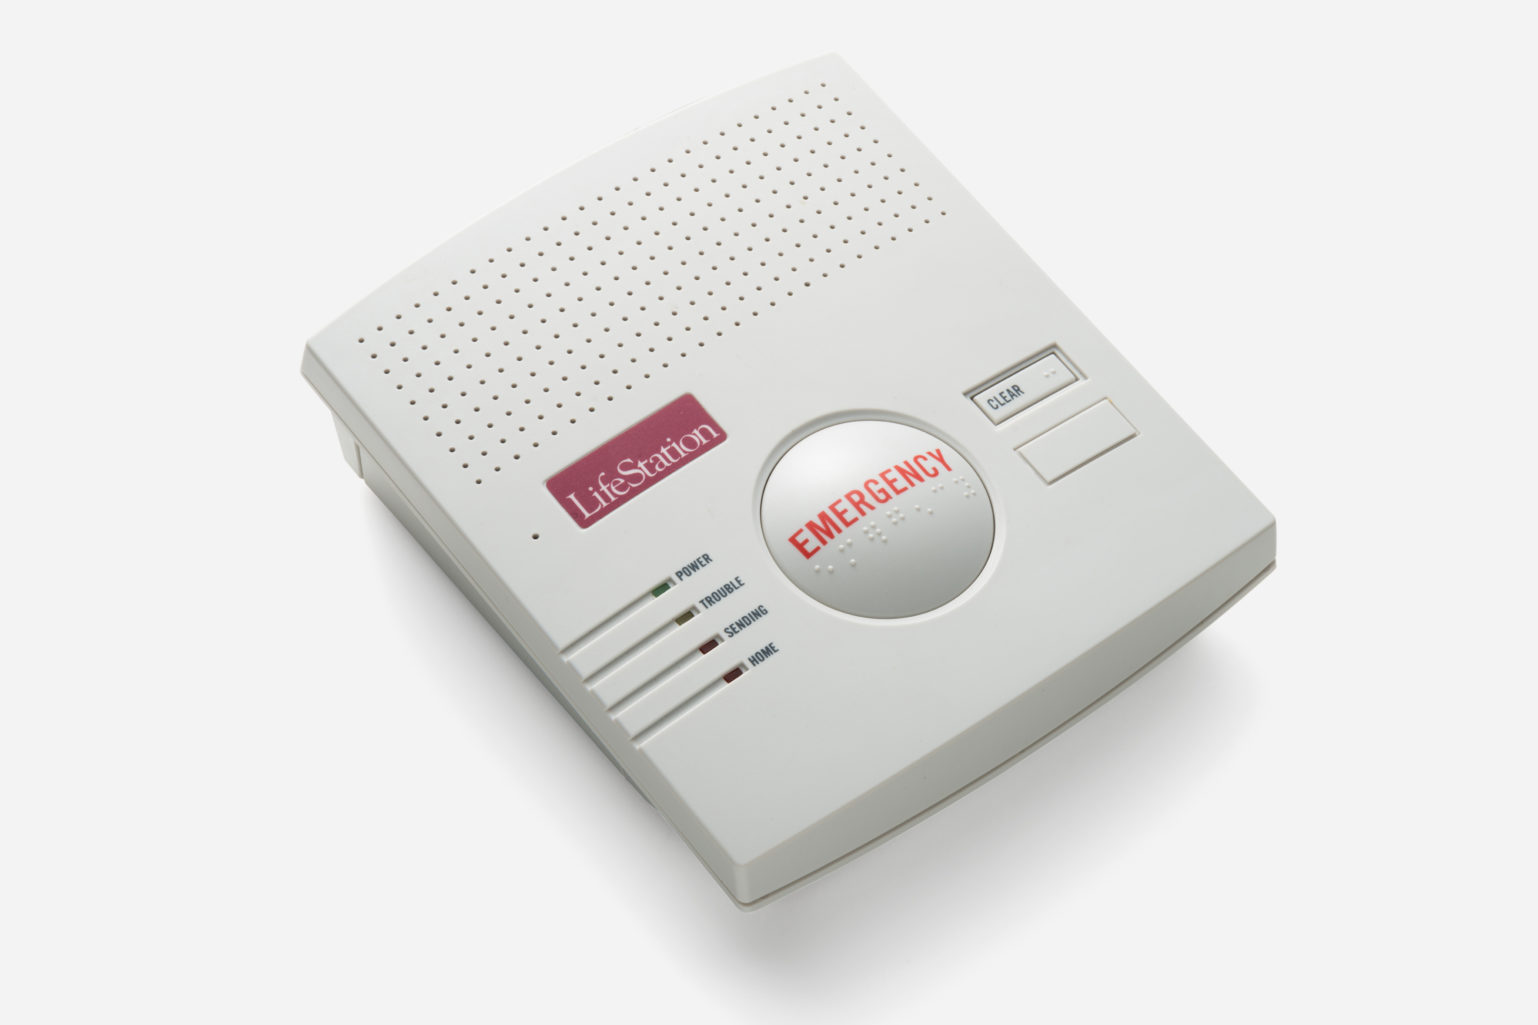 Home medical alert console